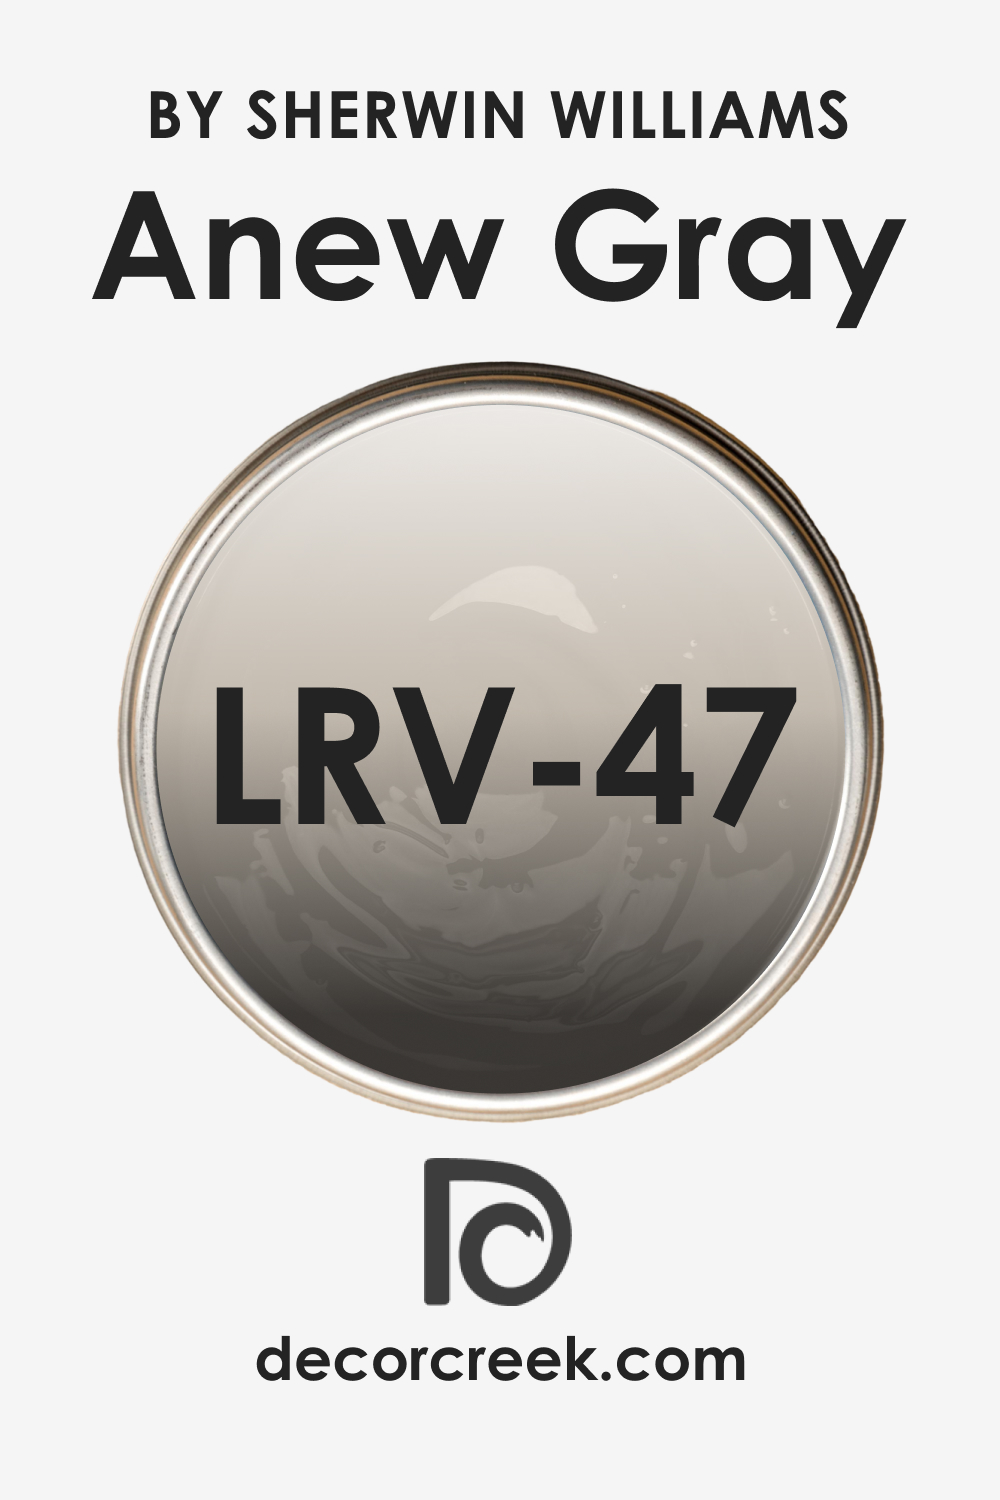 LRV of SW 7030 Anew Gray